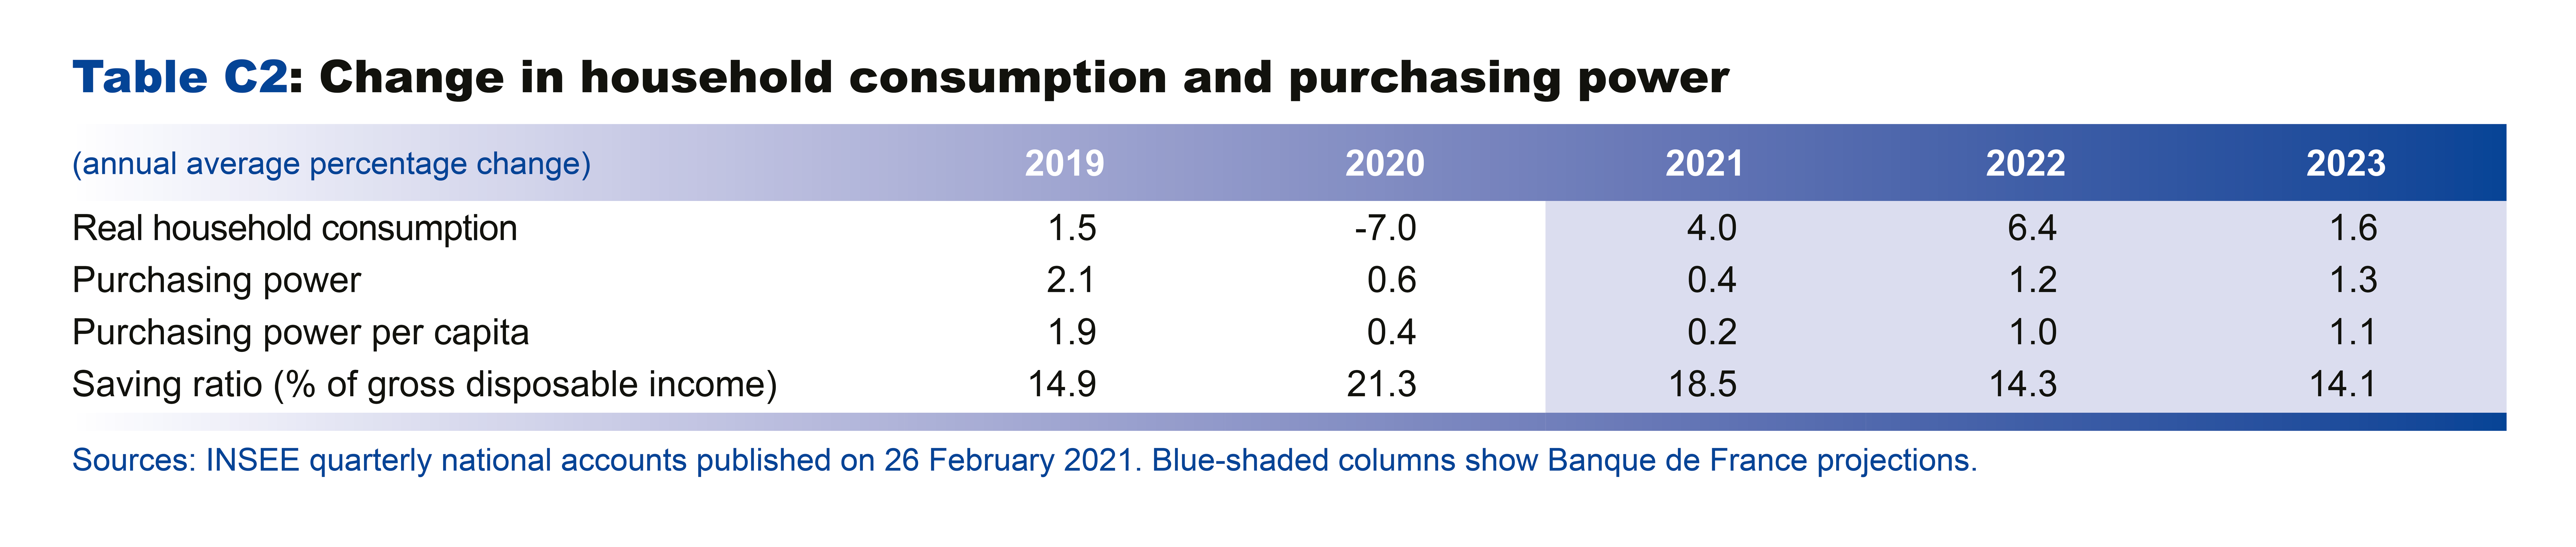 Macroeconomic projections – June 2021 - Change in household consumption and purchasing power